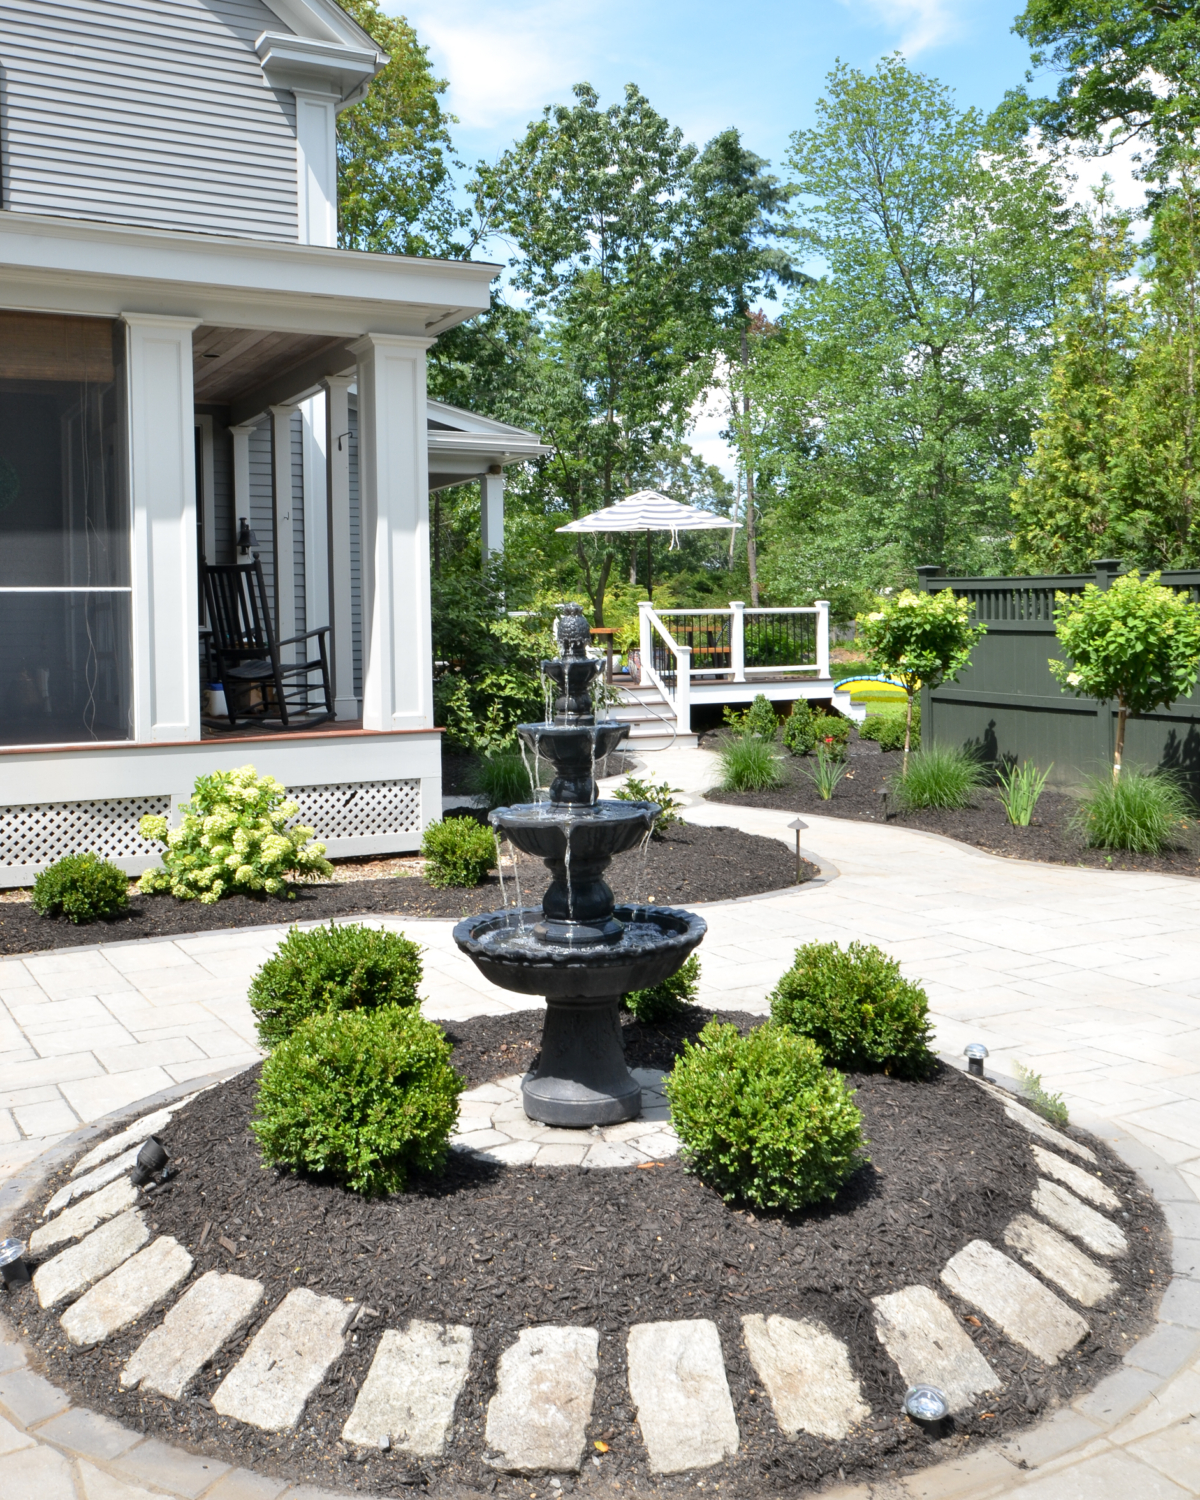 Amazing backyard landscaping makeover that includes a Trex deck, a paver patio with gas firepit, and a paver patio with a fountain and benches. So much outdoor inspiration!